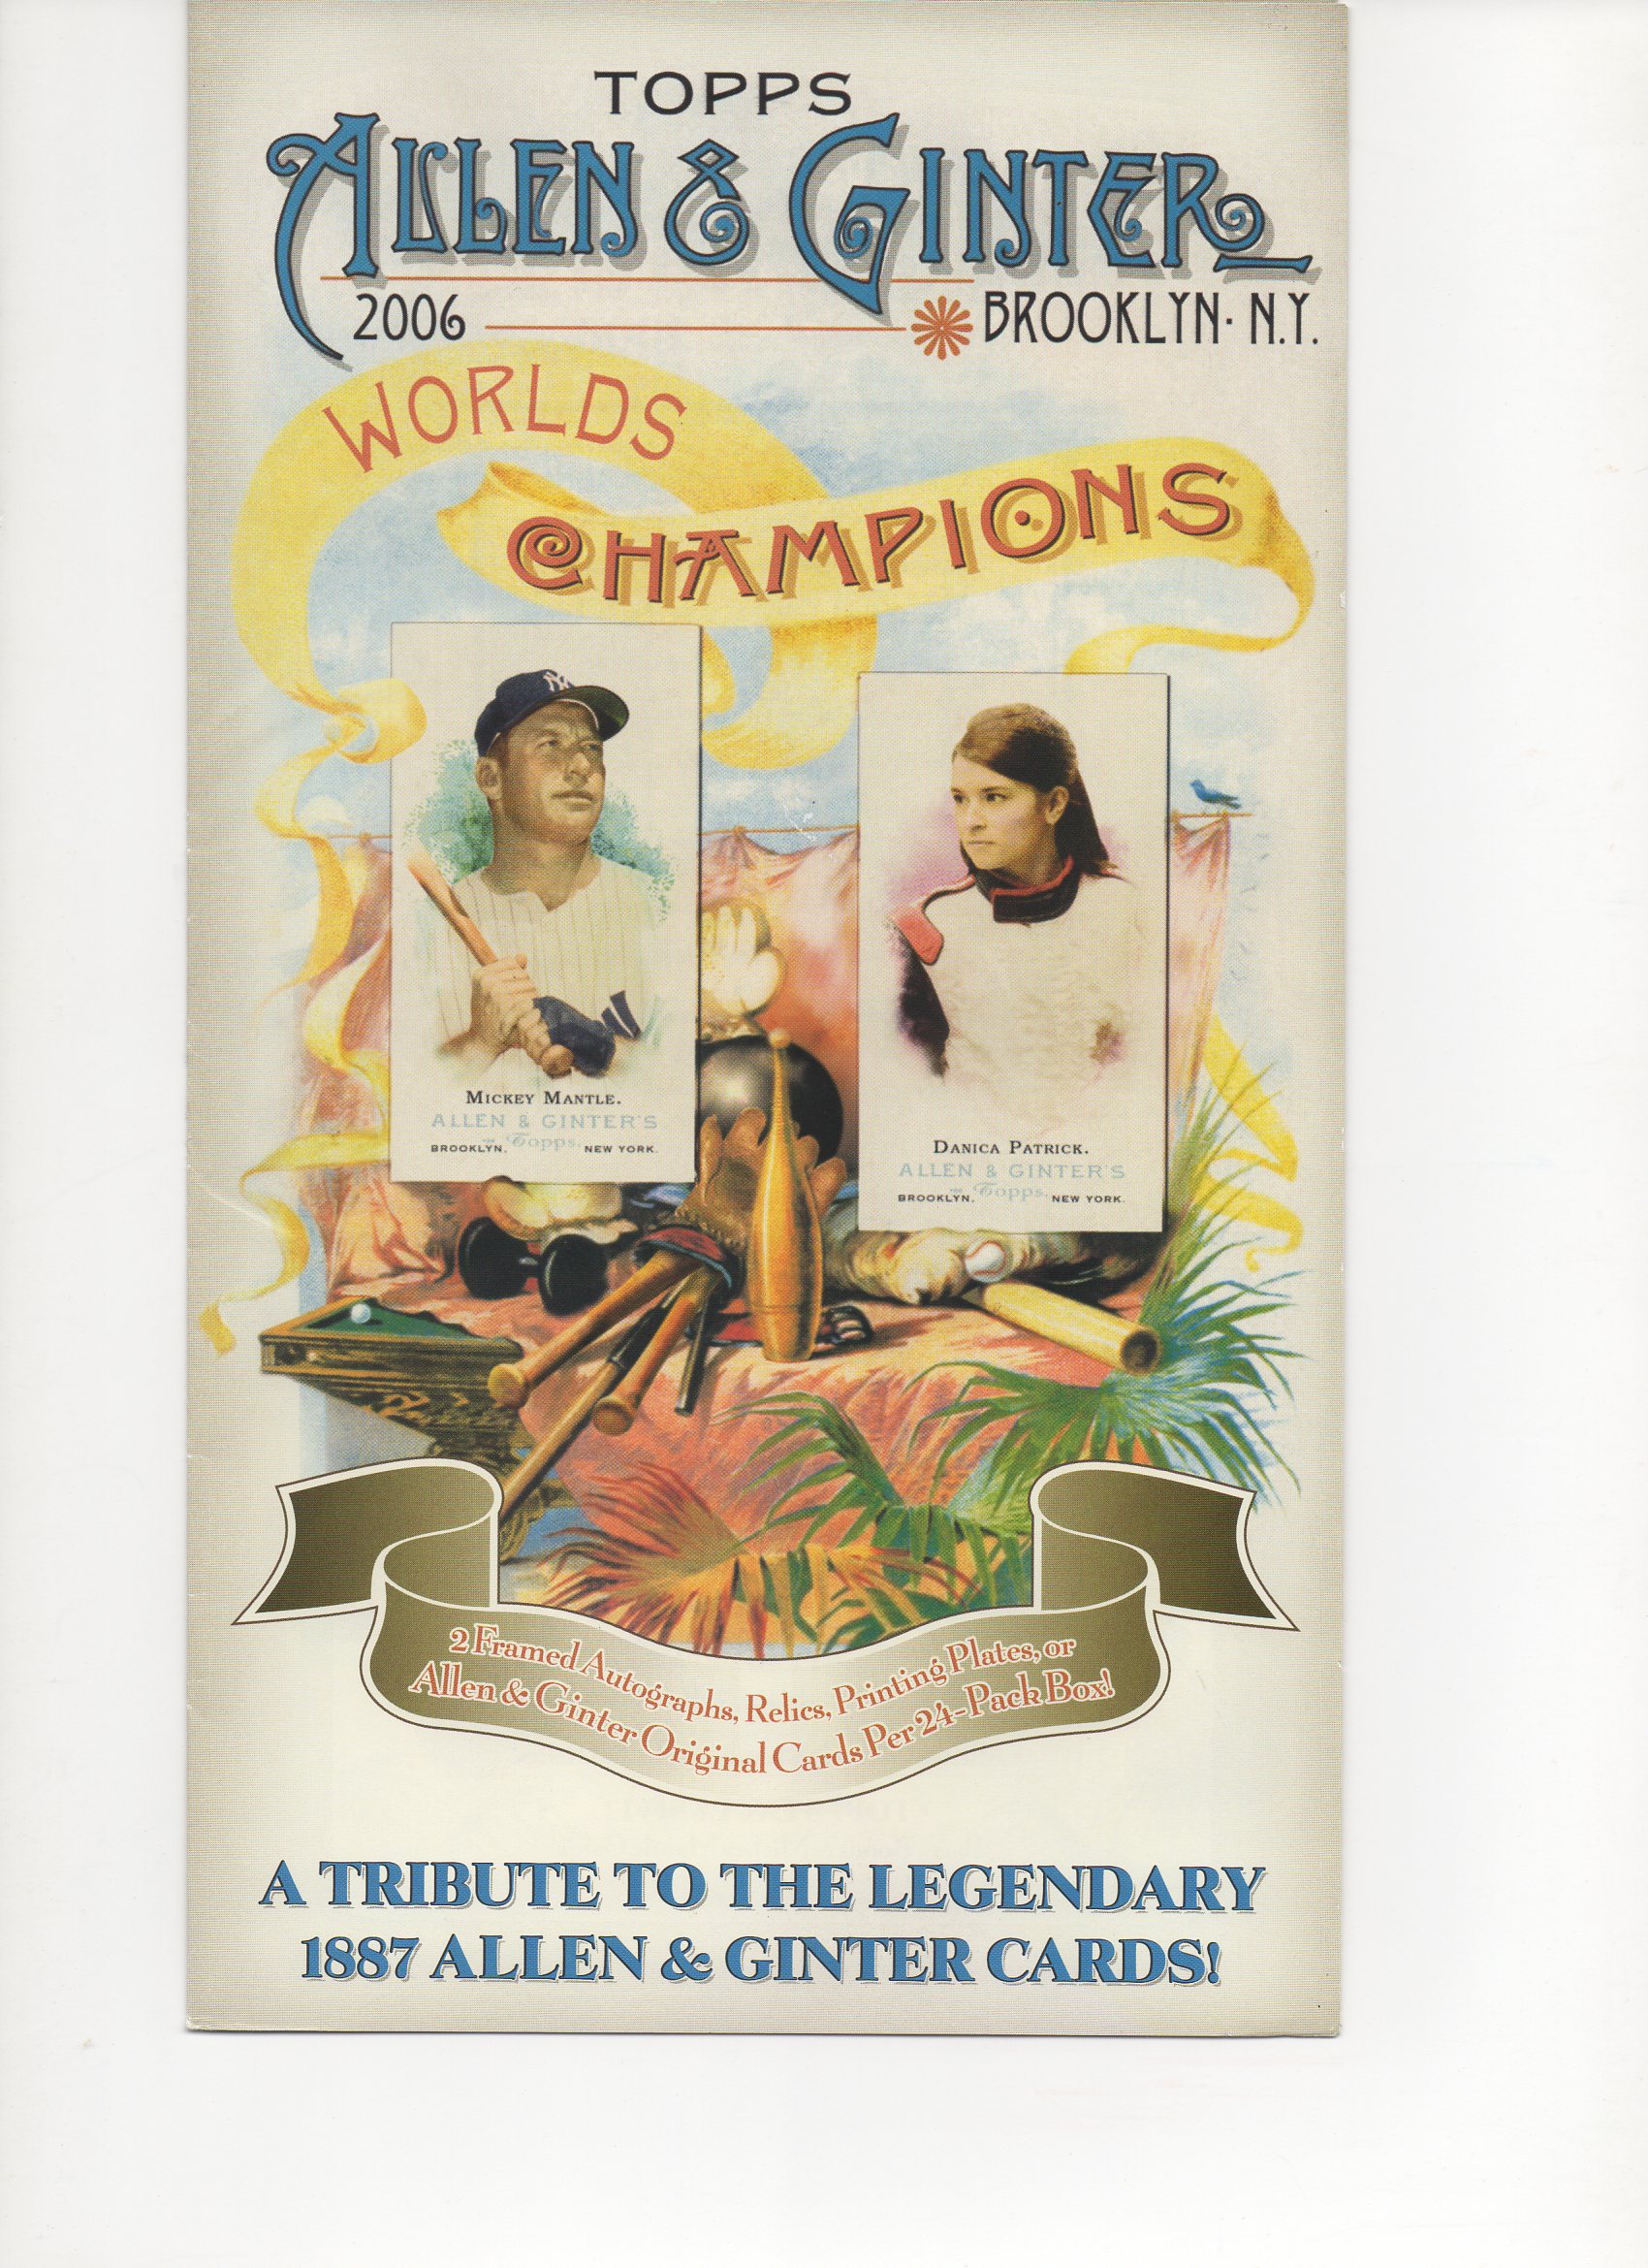 2006 topps allen and ginter 4 page heavy stock foldout